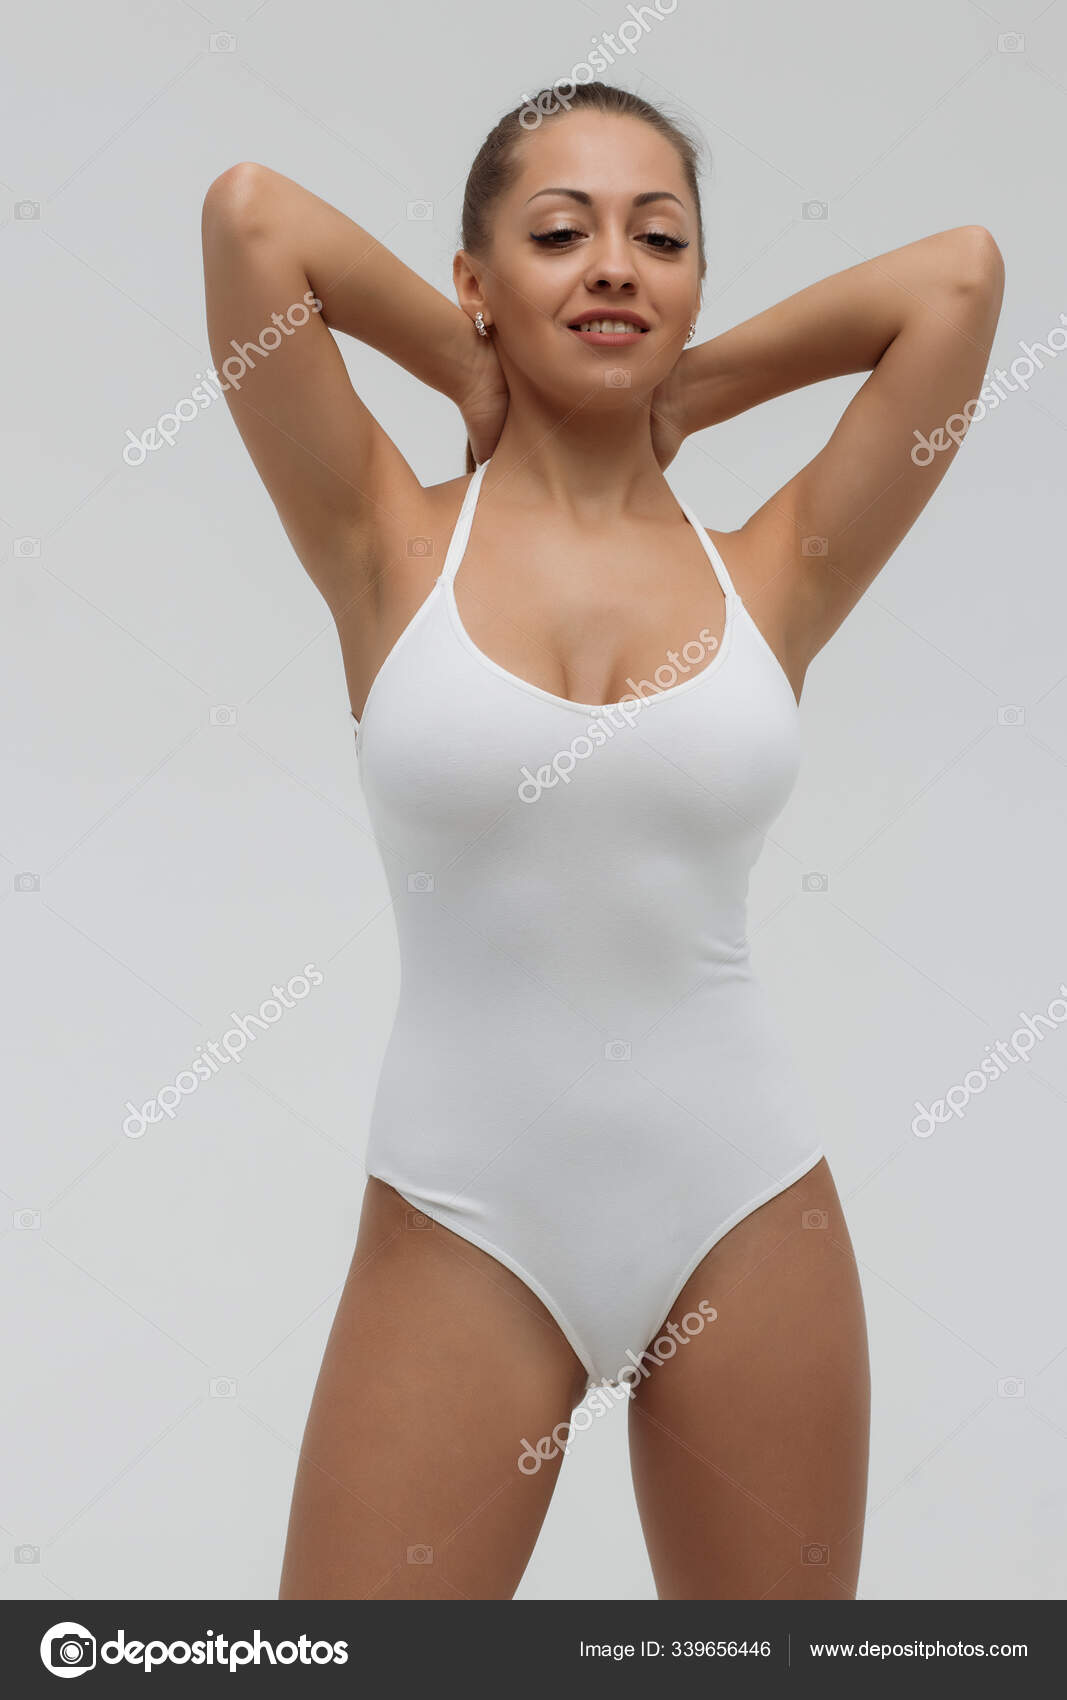 Crop gorgeous woman taking off swimsuit - Stock Photo, Image. 